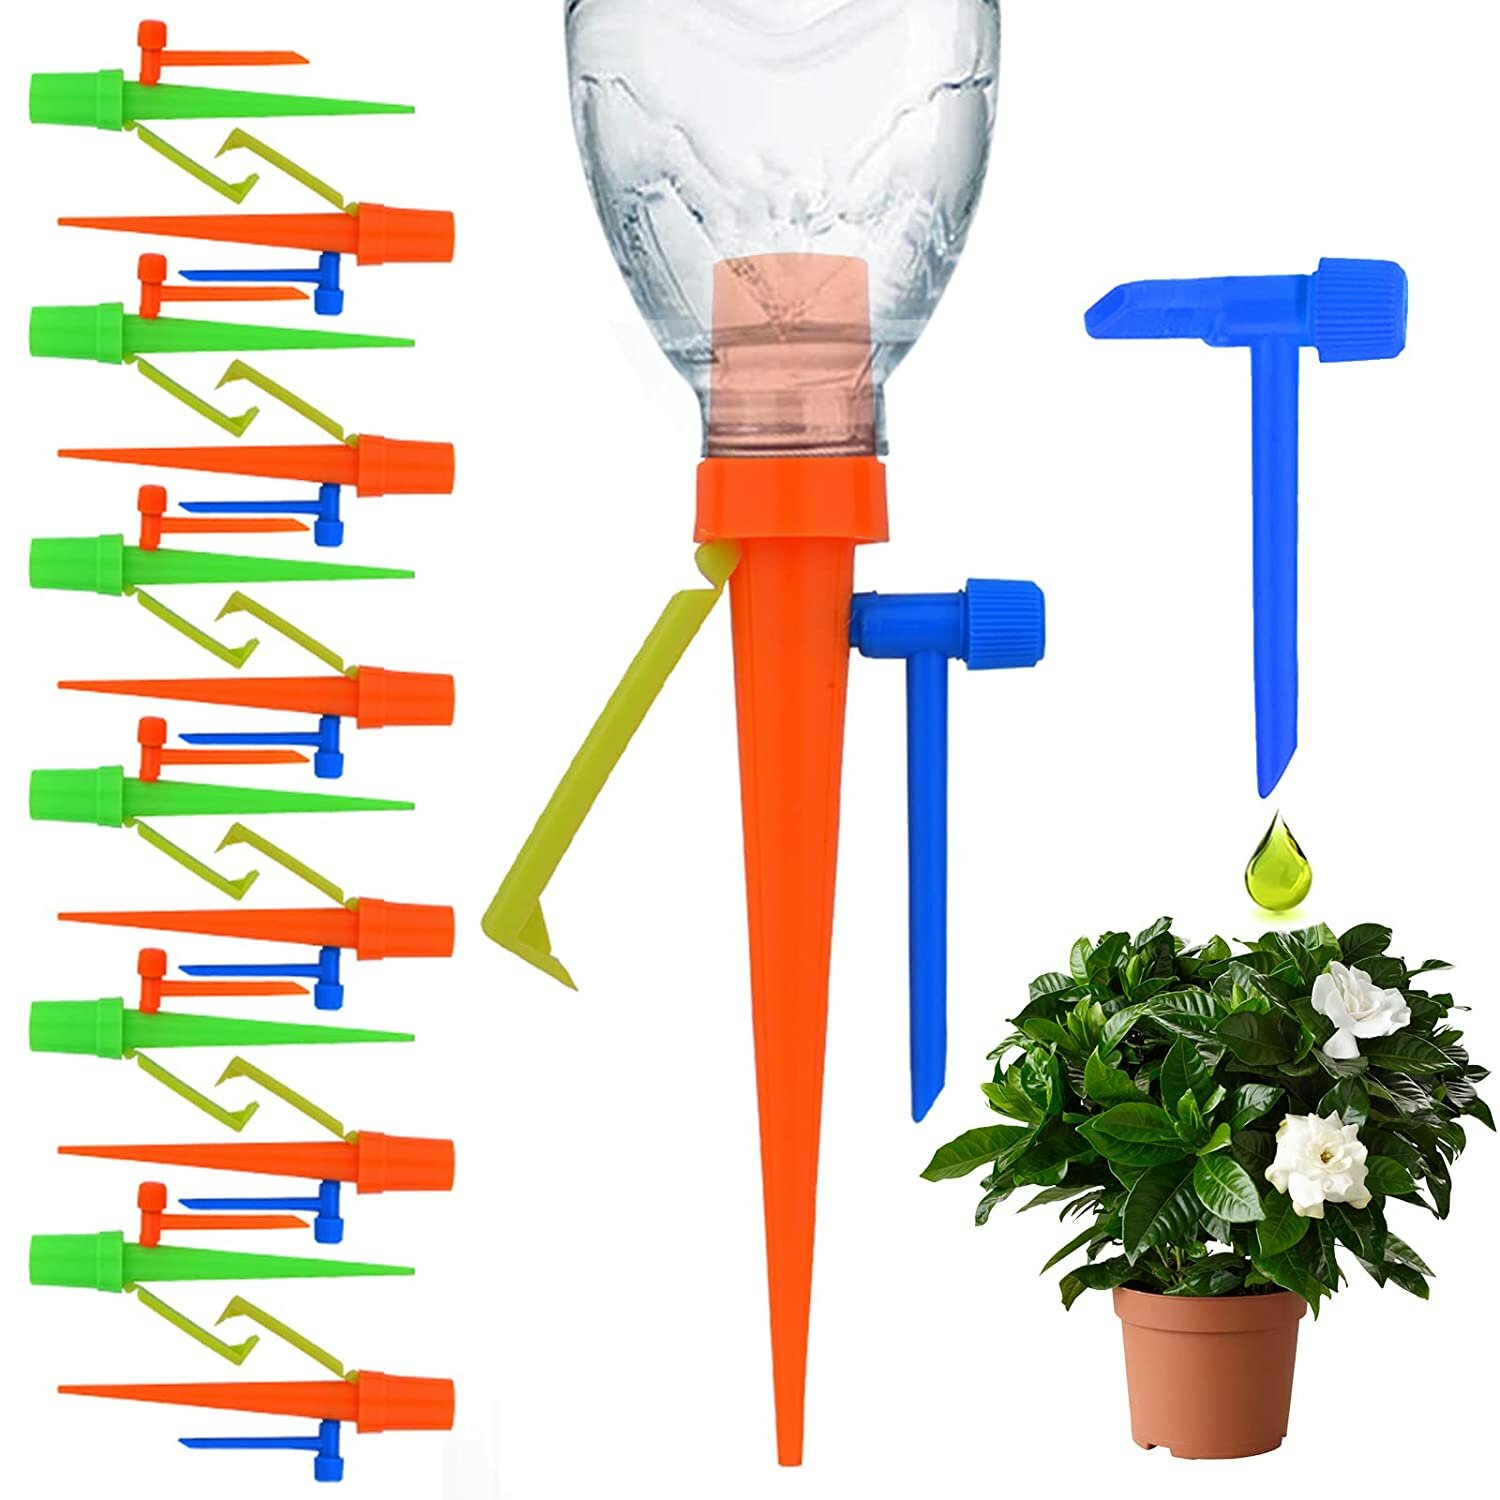 12Pcs Upgraded Plant Self Watering Spikes Devices Slow Release Control Valve Switch Automatic Irriga